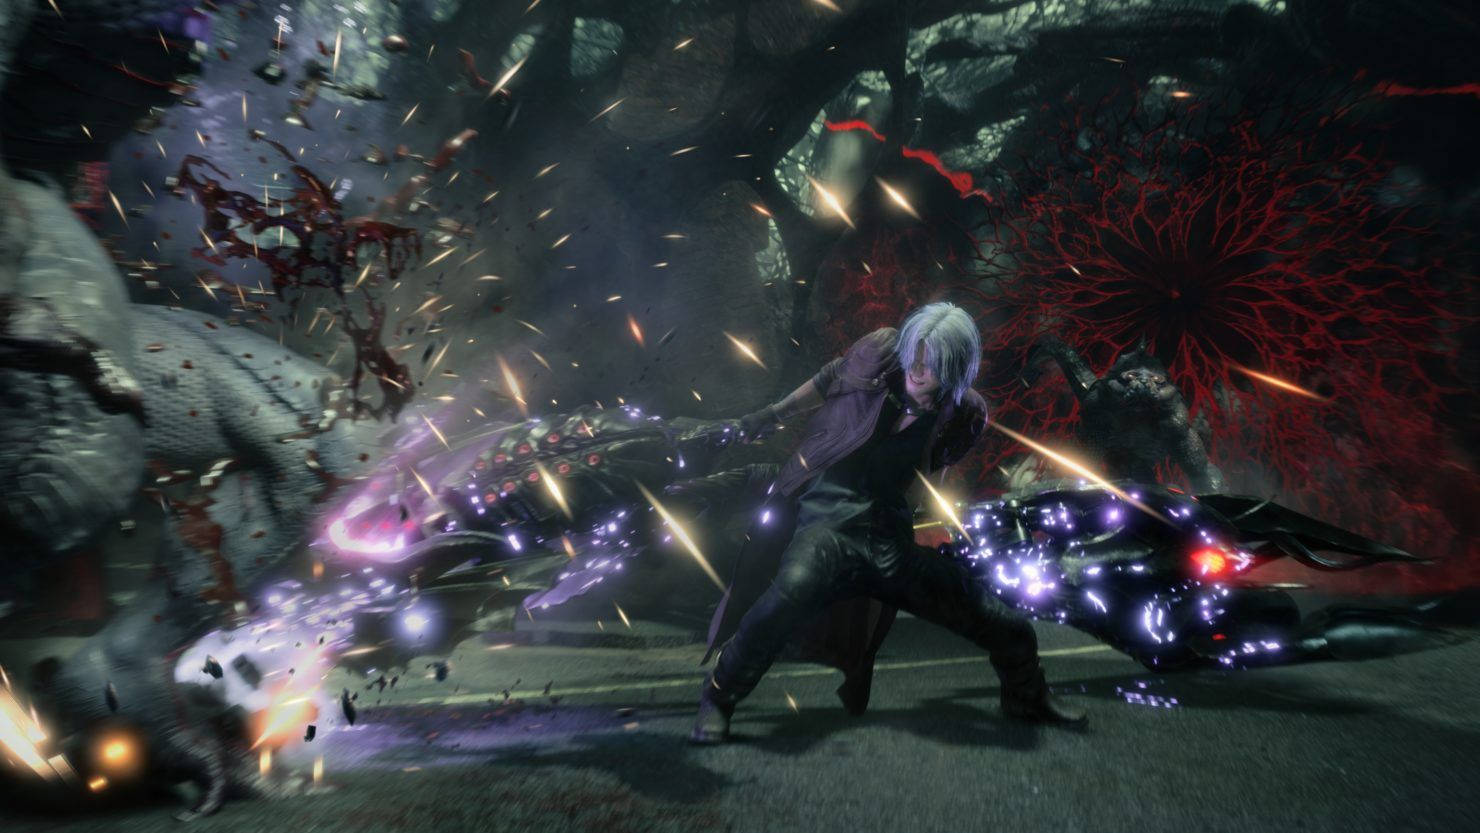 Dante and Nero take on the city by motorcycle in Devil May Cry 5 Wallpaper